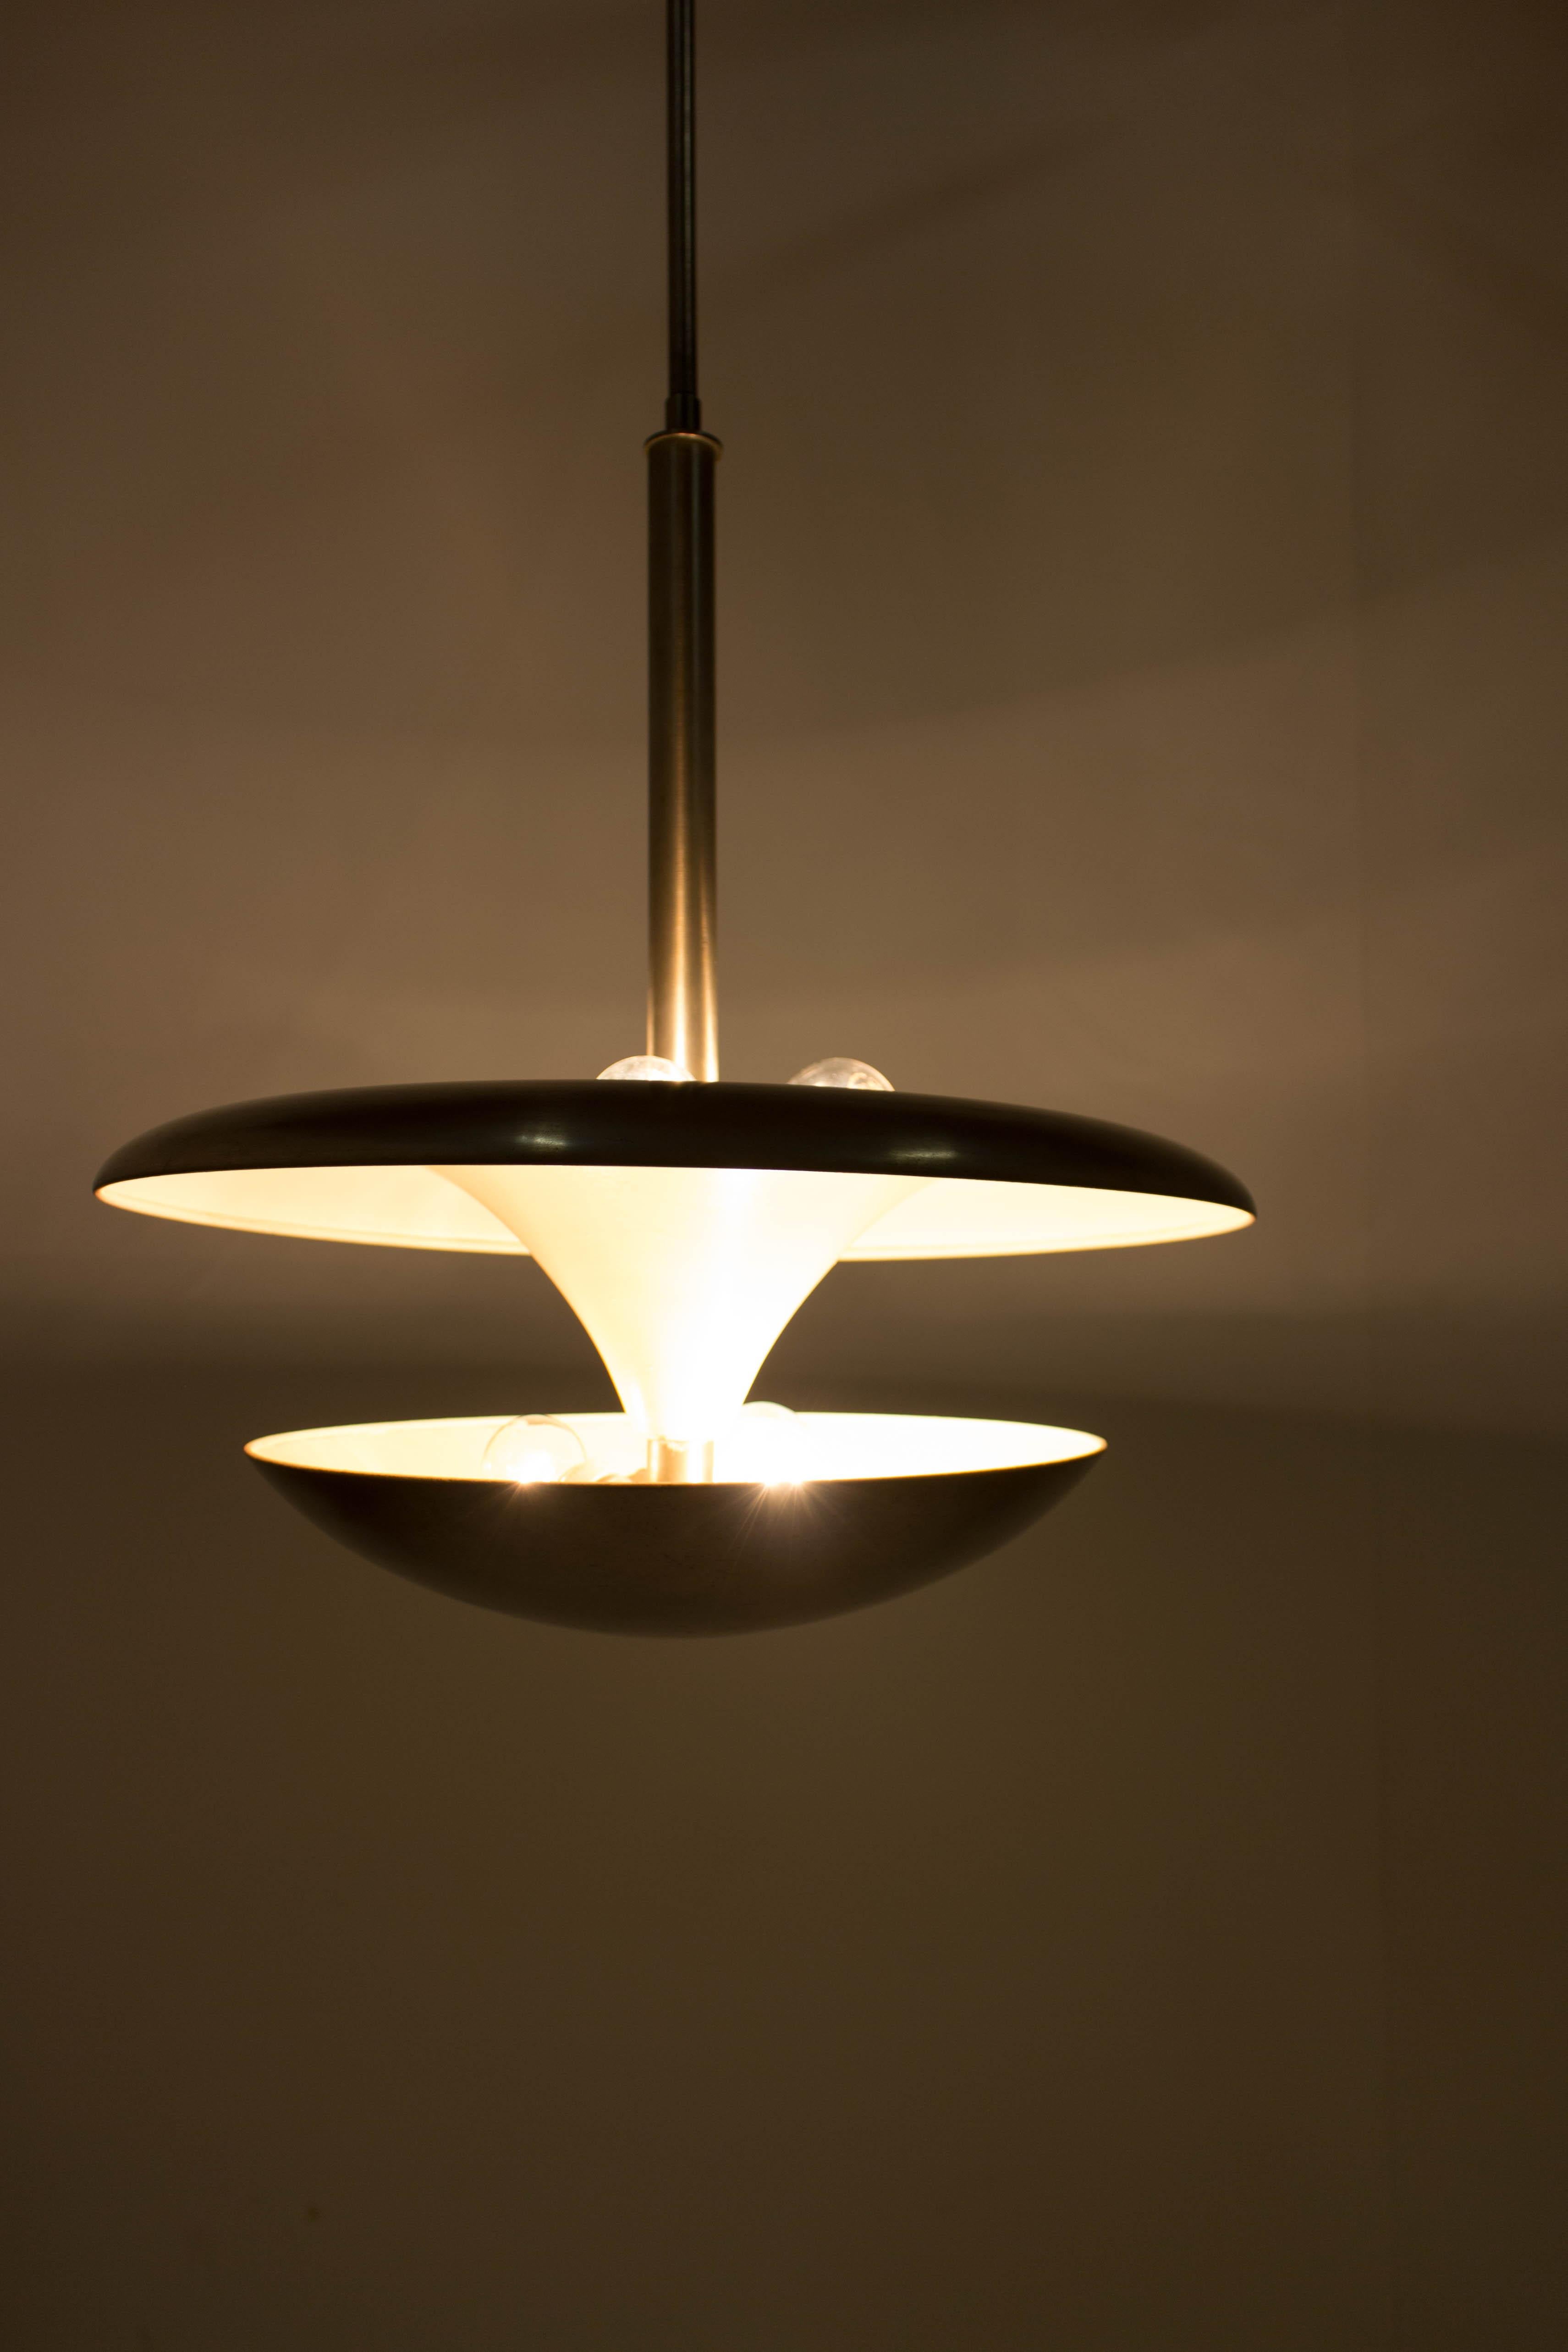 Very rare Bauhaus chandelier designed by Frantisek Anyz in 1920s and produced by his company IAS. Nickel-plated. Upper and lower bulbs could be switched separately to produce different kinds of lighting. Very elegant! Very rare! Very good condition.